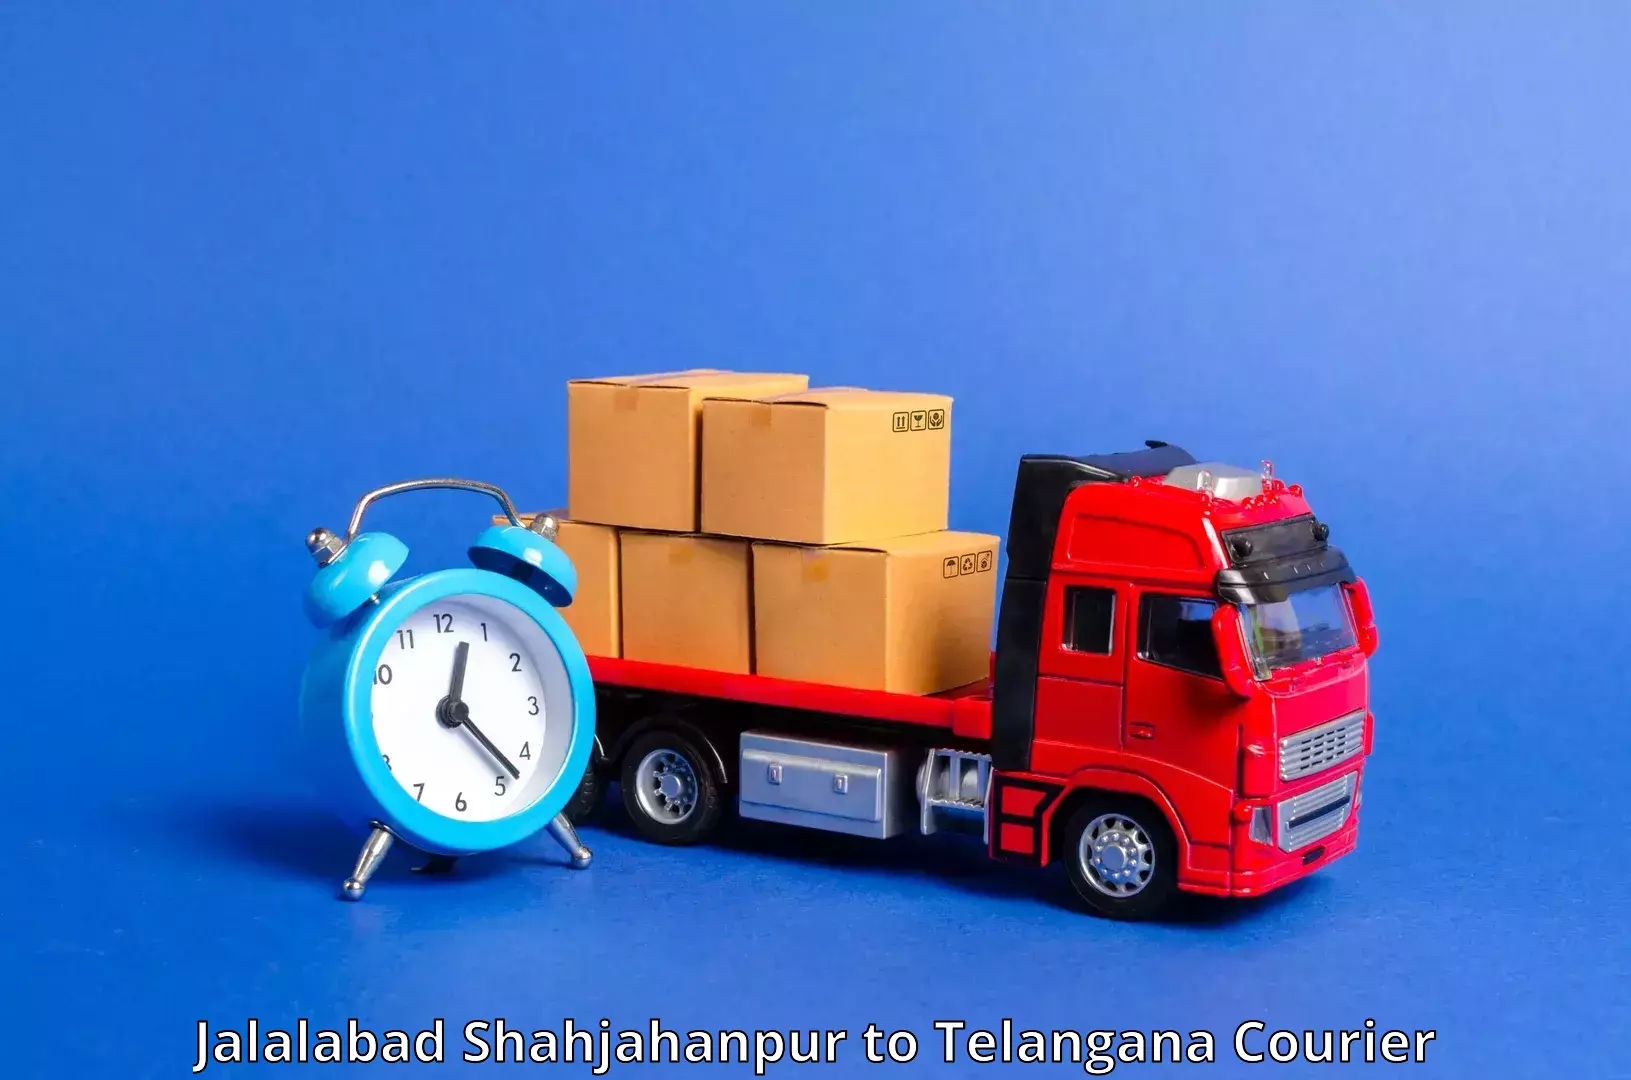 User-friendly courier app Jalalabad Shahjahanpur to Vemulawada